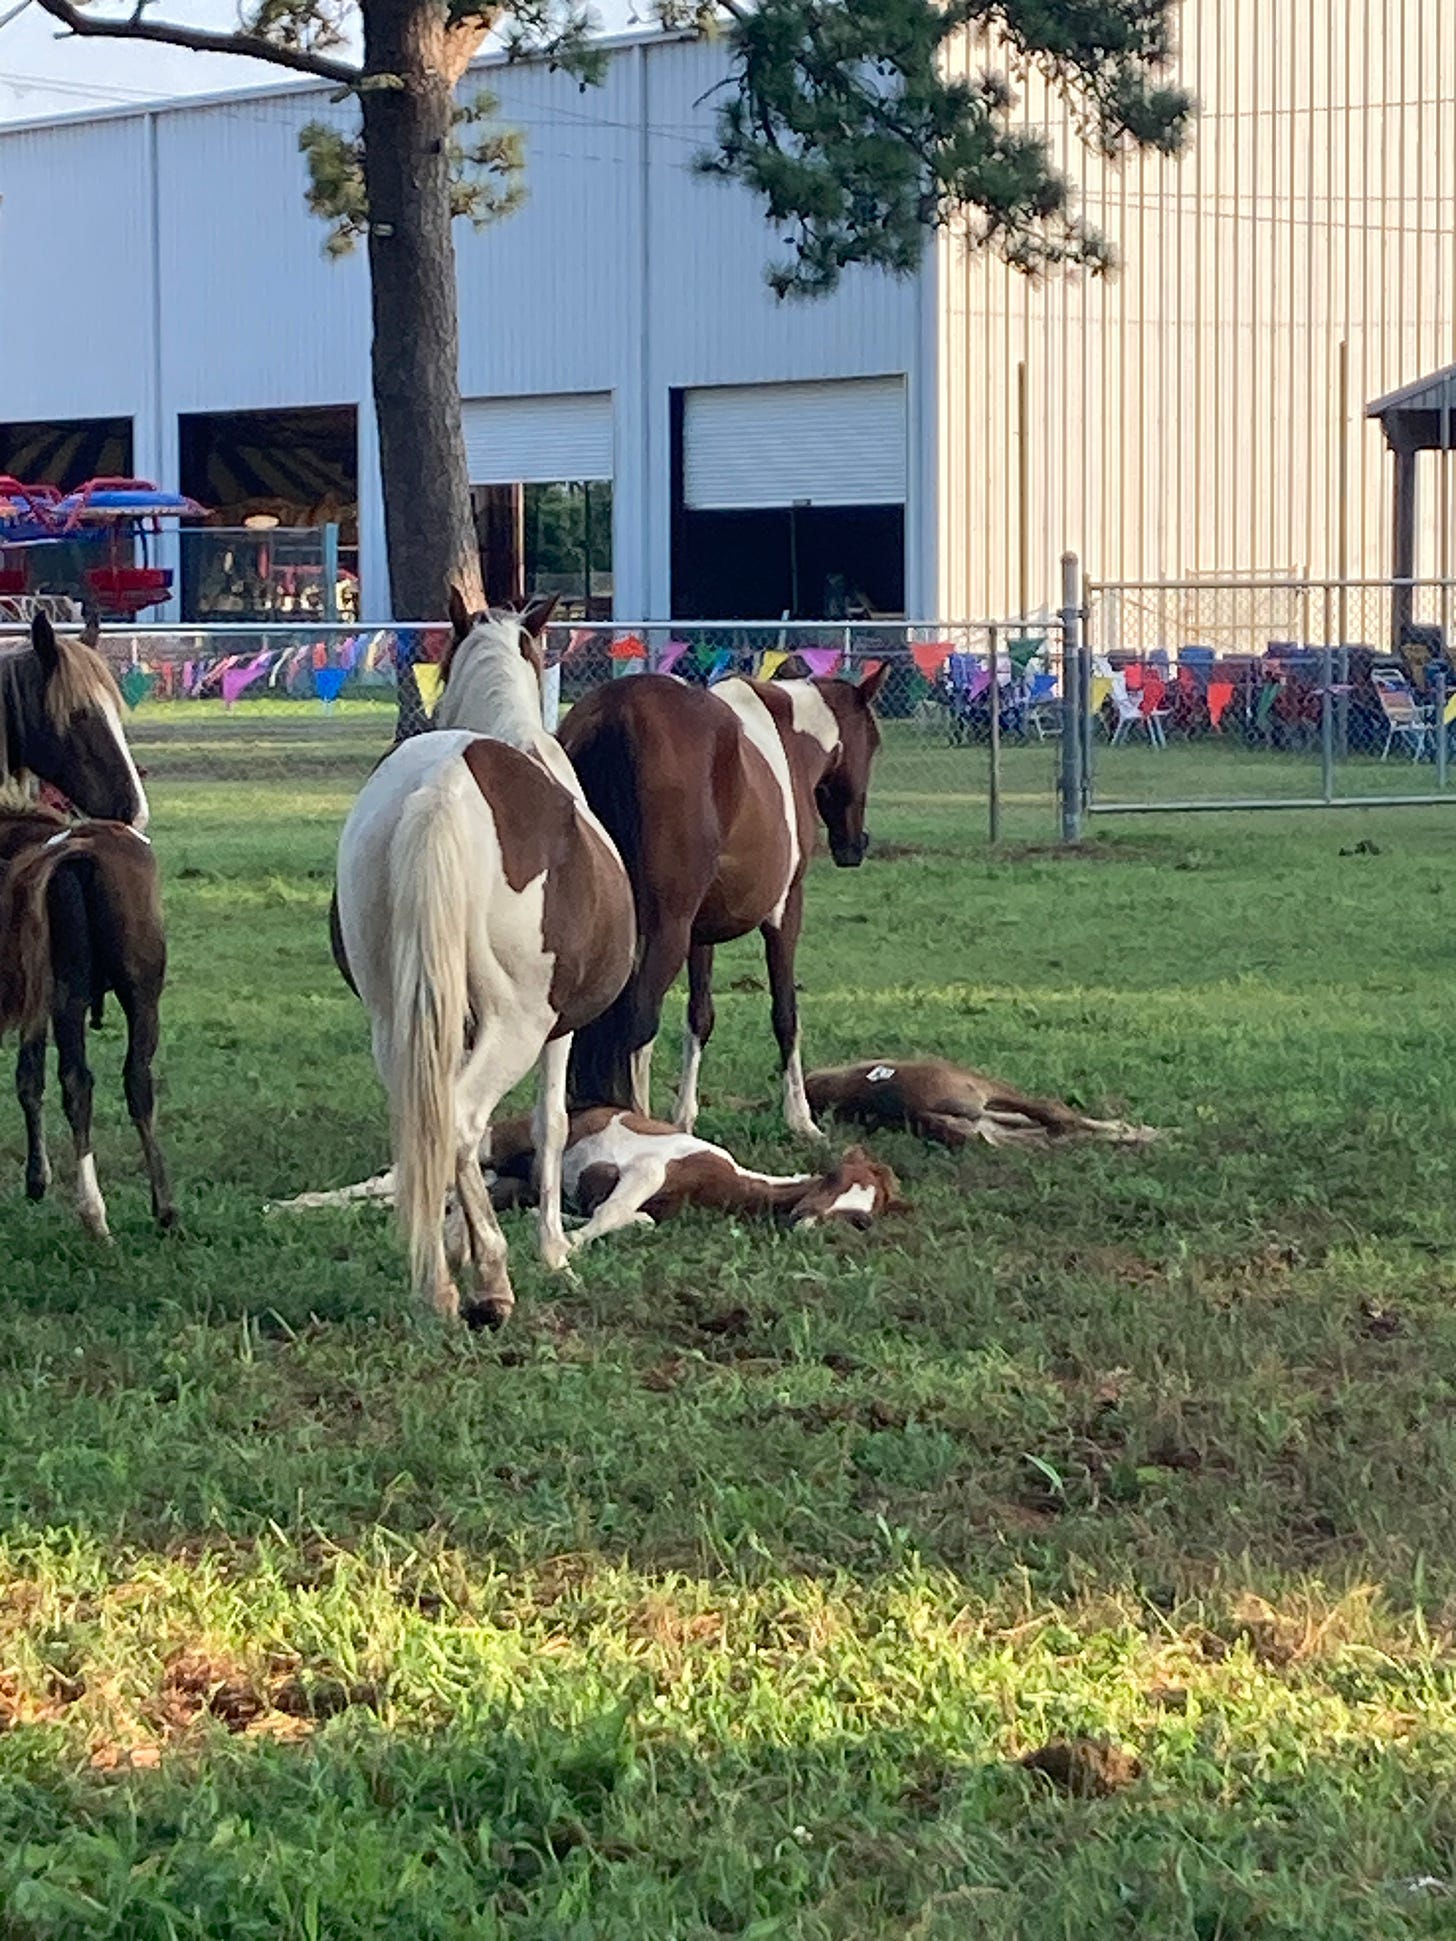 Two mares, backs to the camera, stand over their foals, who are napping the grass. A metal fence and large white building are in the background.